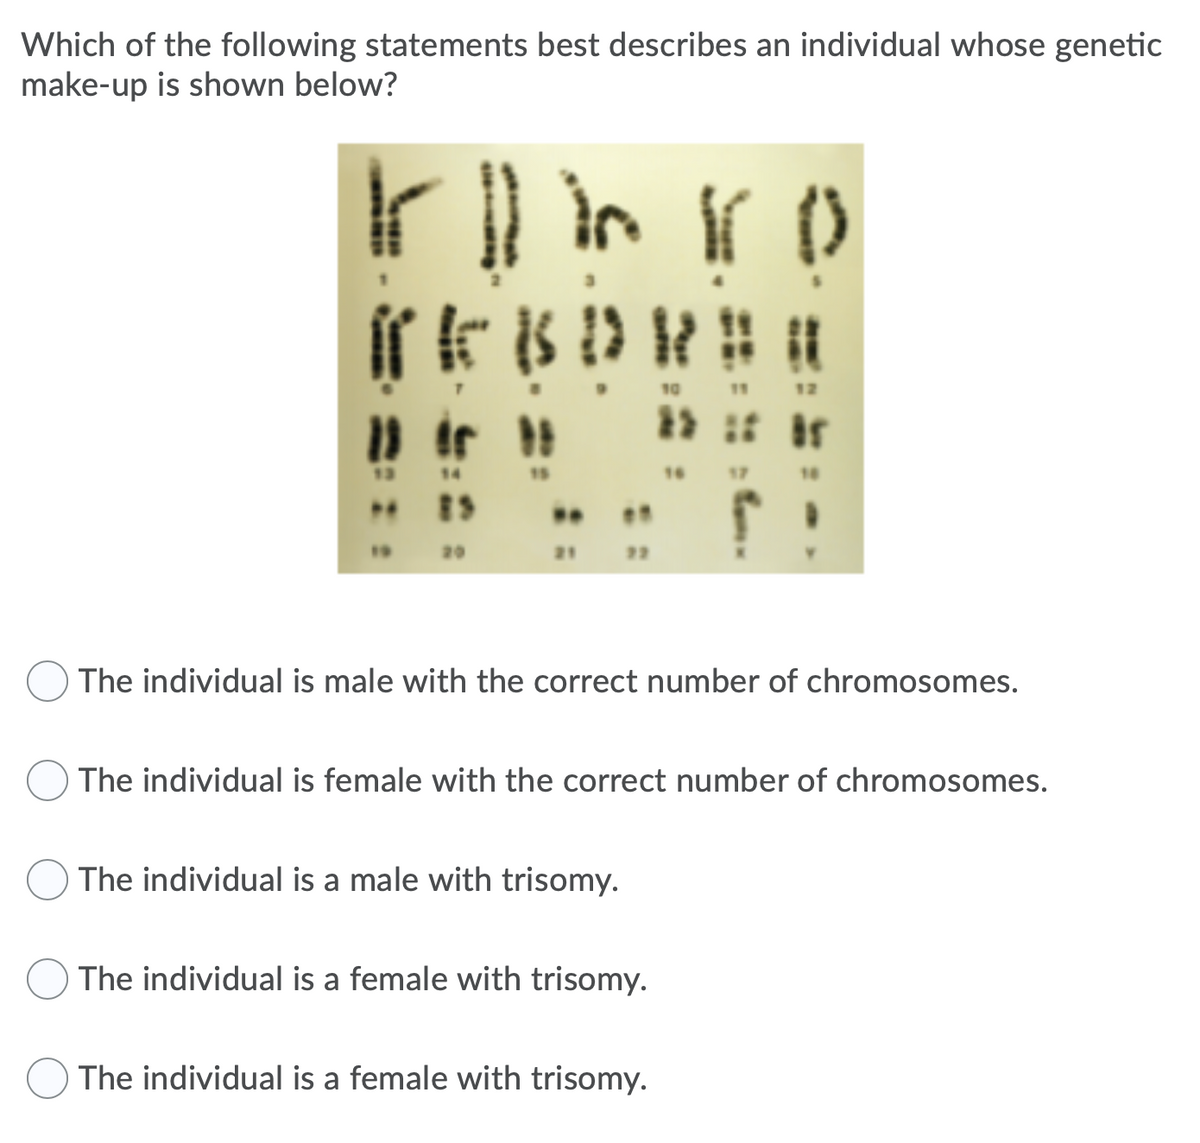 Which of the following statements best describes an individual whose genetic
make-up is shown below?
in
()
10
11
12
13
14
15
16
17
18
19
20
21 22
The individual is male with the correct number of chromosomes.
The individual is female with the correct number of chromosomes.
The individual is a male with trisomy.
The individual is a female with trisomy.
The individual is a female with trisomy.
